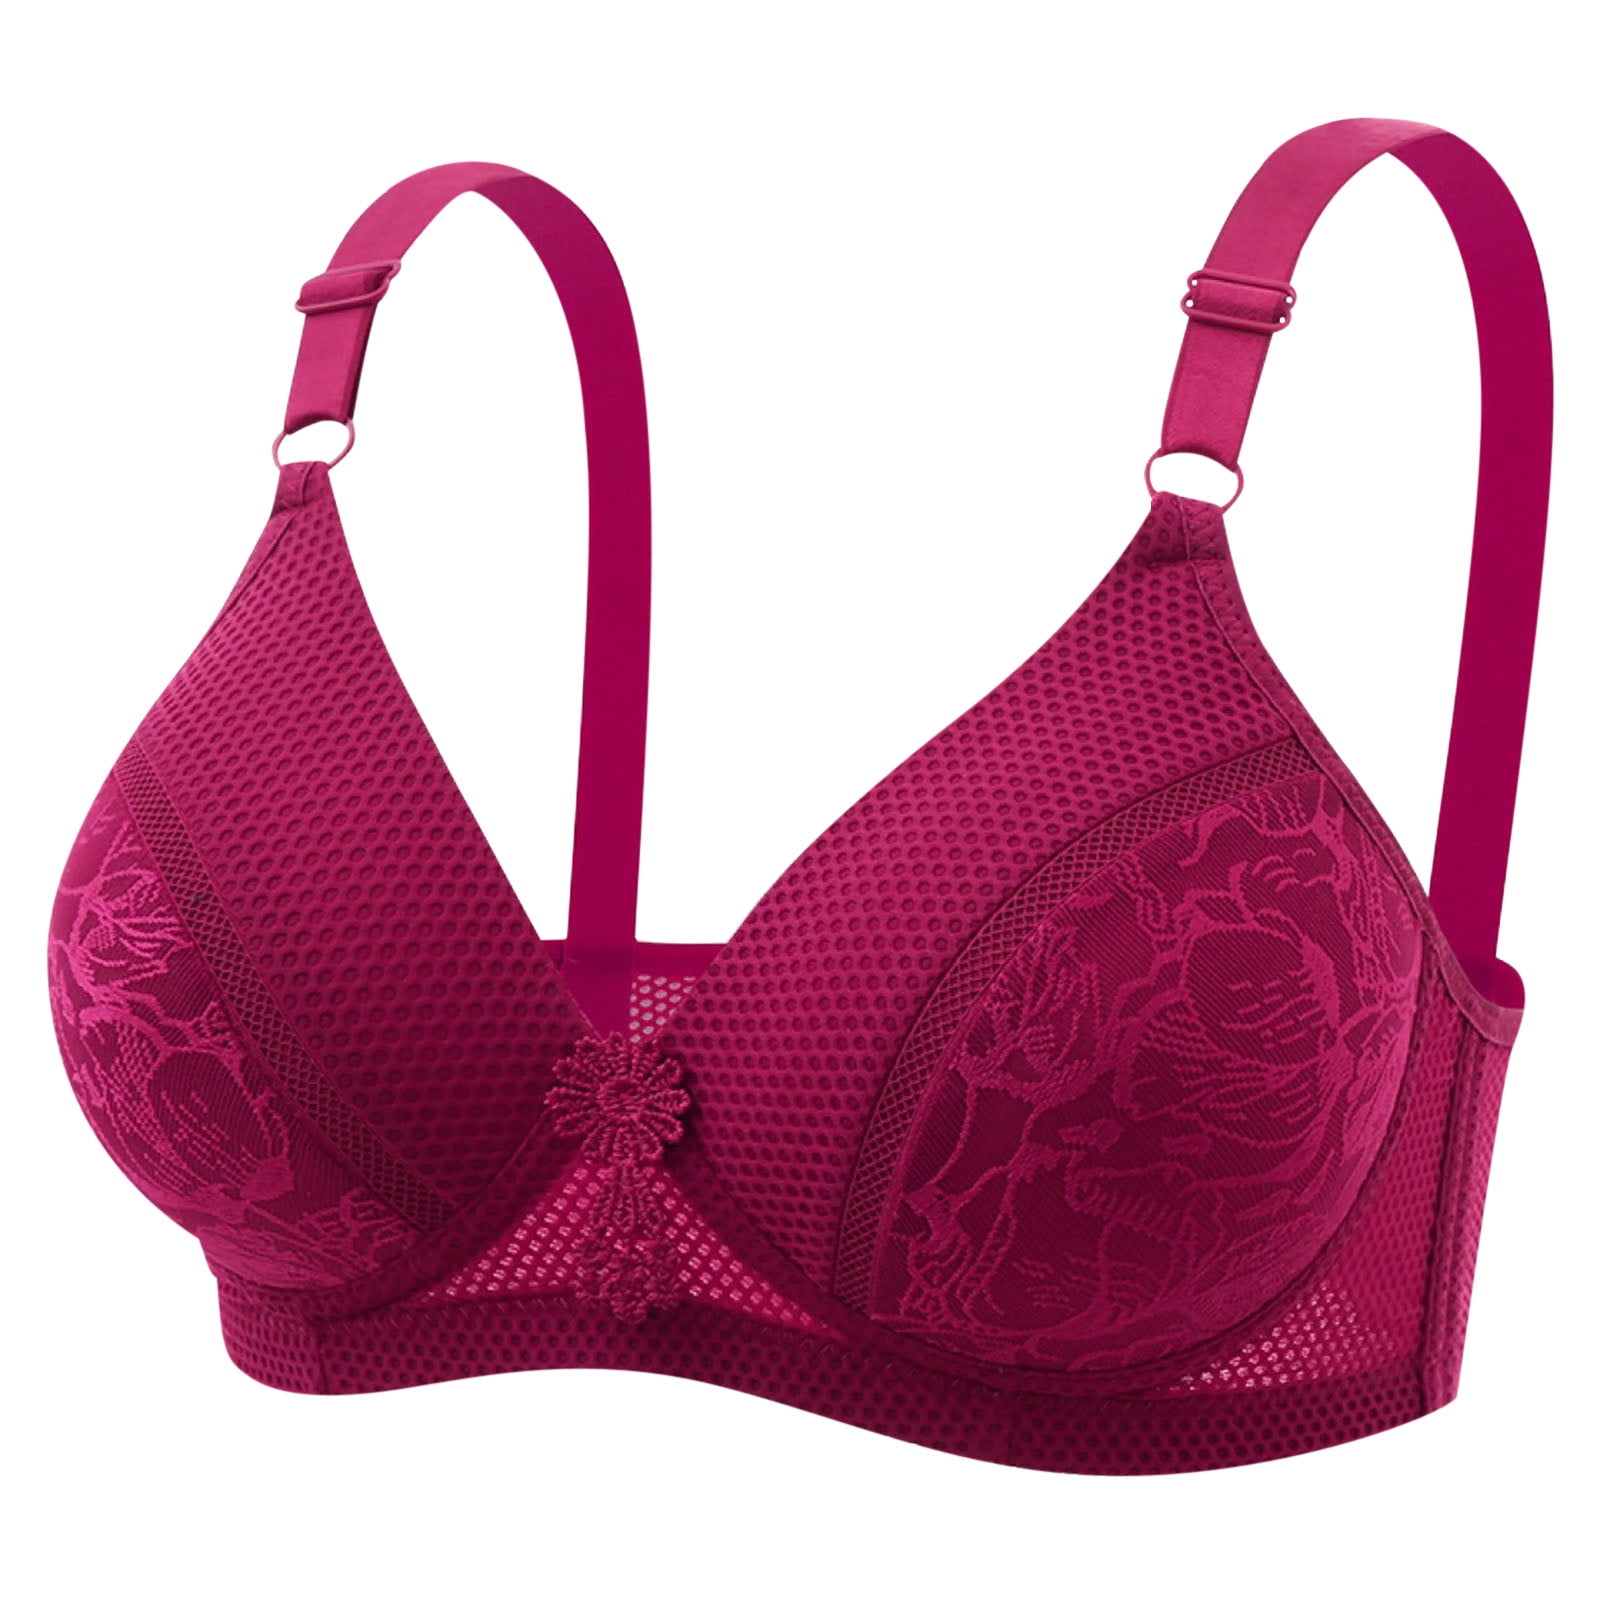 Lopecy-Sta Woman Sexy Ladies Bra without Steel Rings Medium Cup